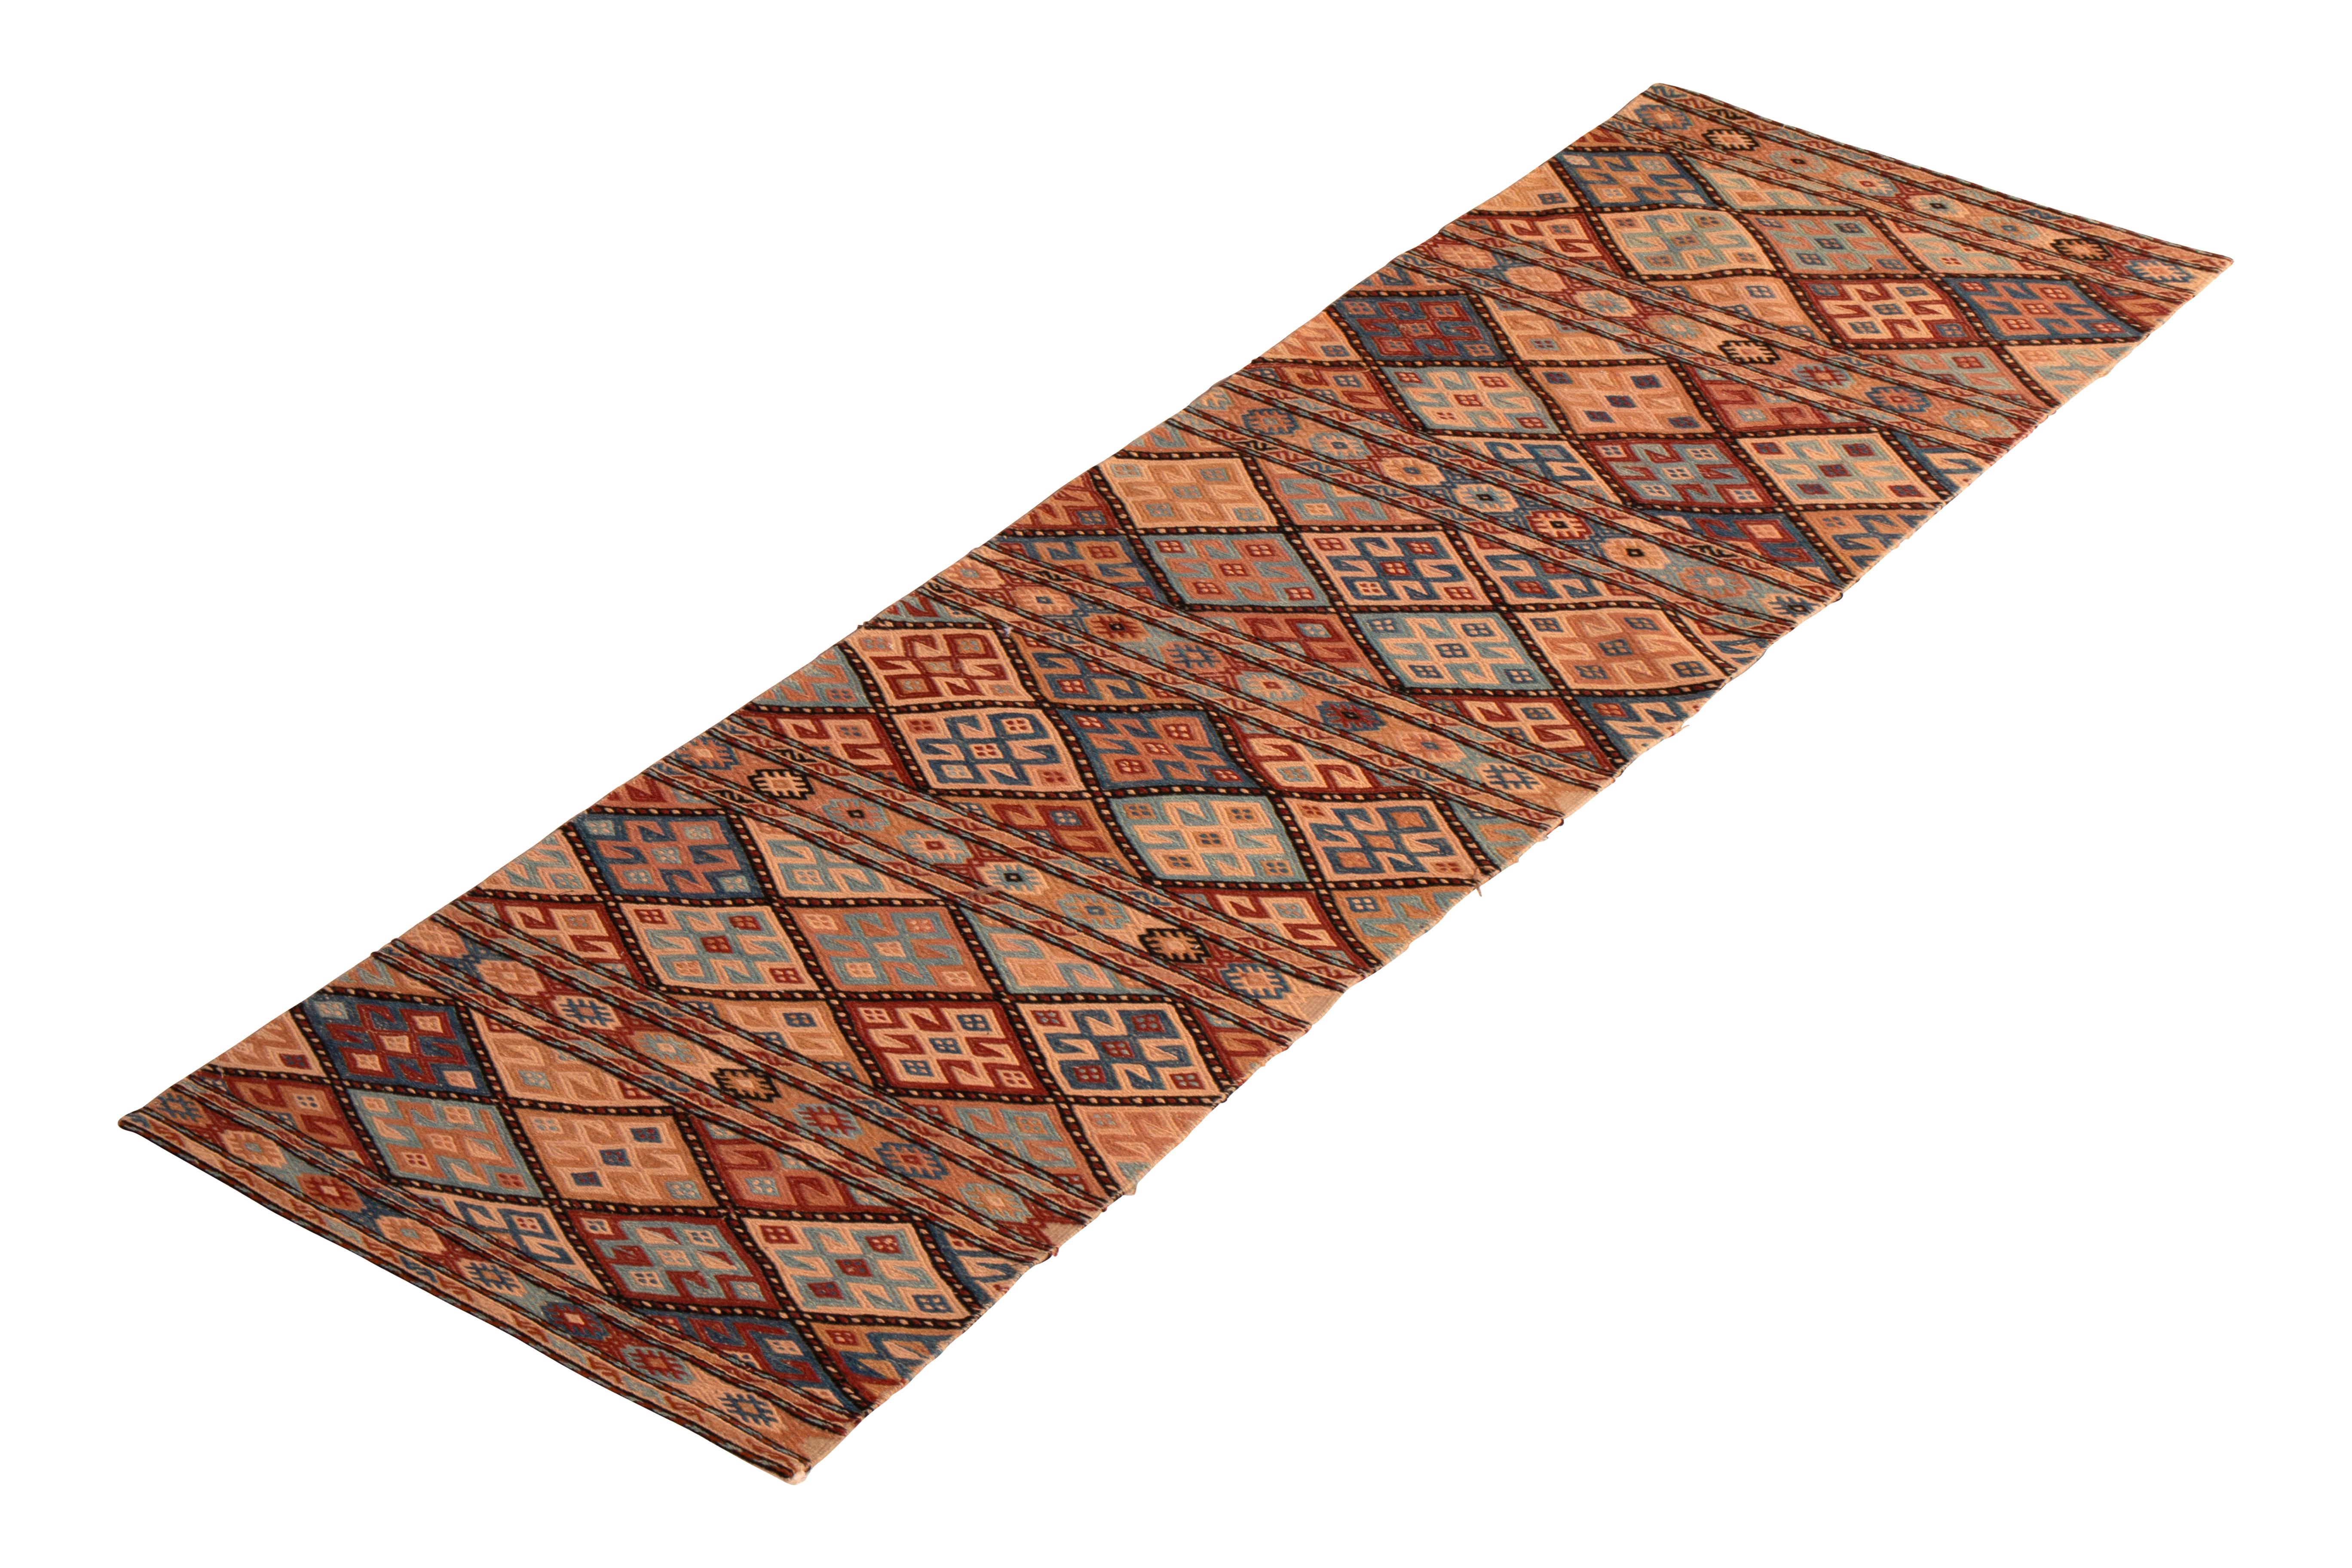 Chinese Contemporary Harput-Style Kilim Blue Camel Geometric All-Over Flat-Weave Runner